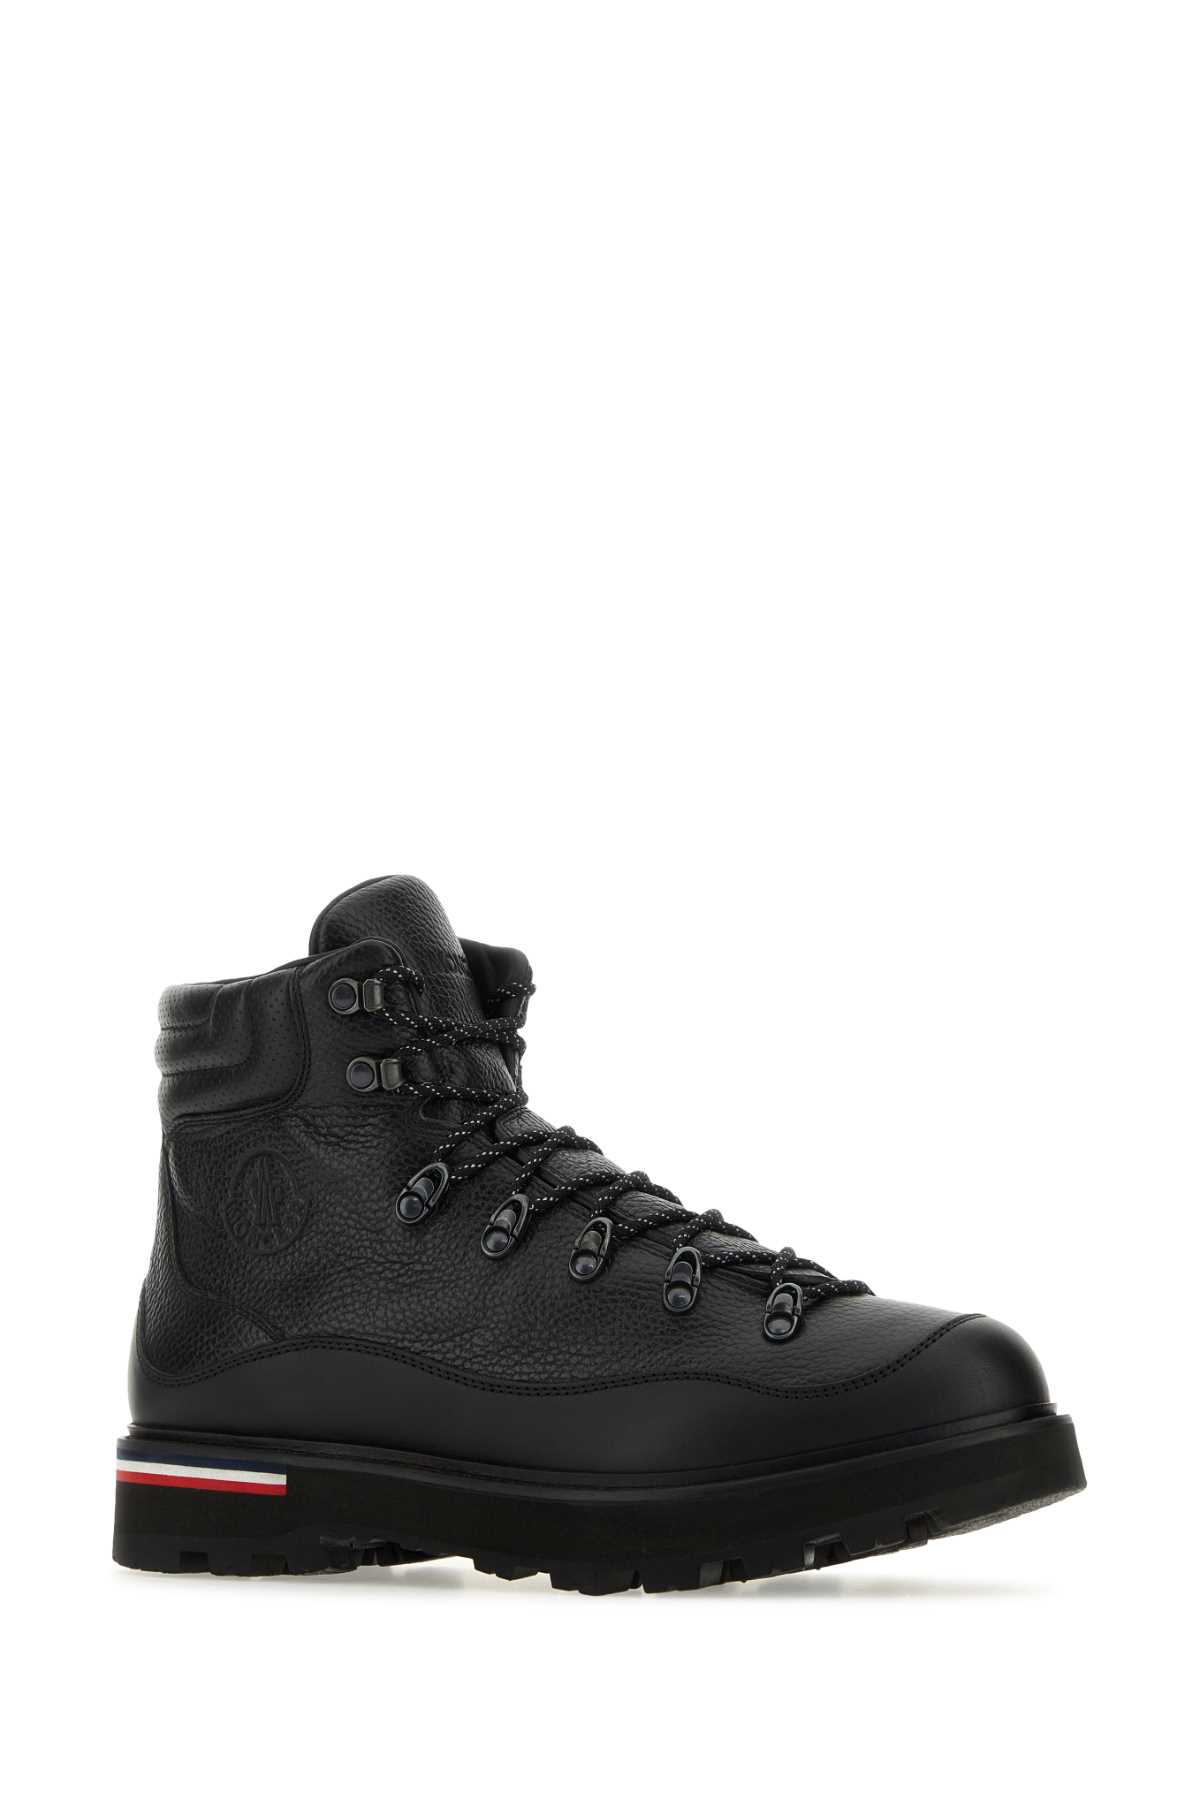 Moncler Black Leather Peka Trek Ankle Boots In P97